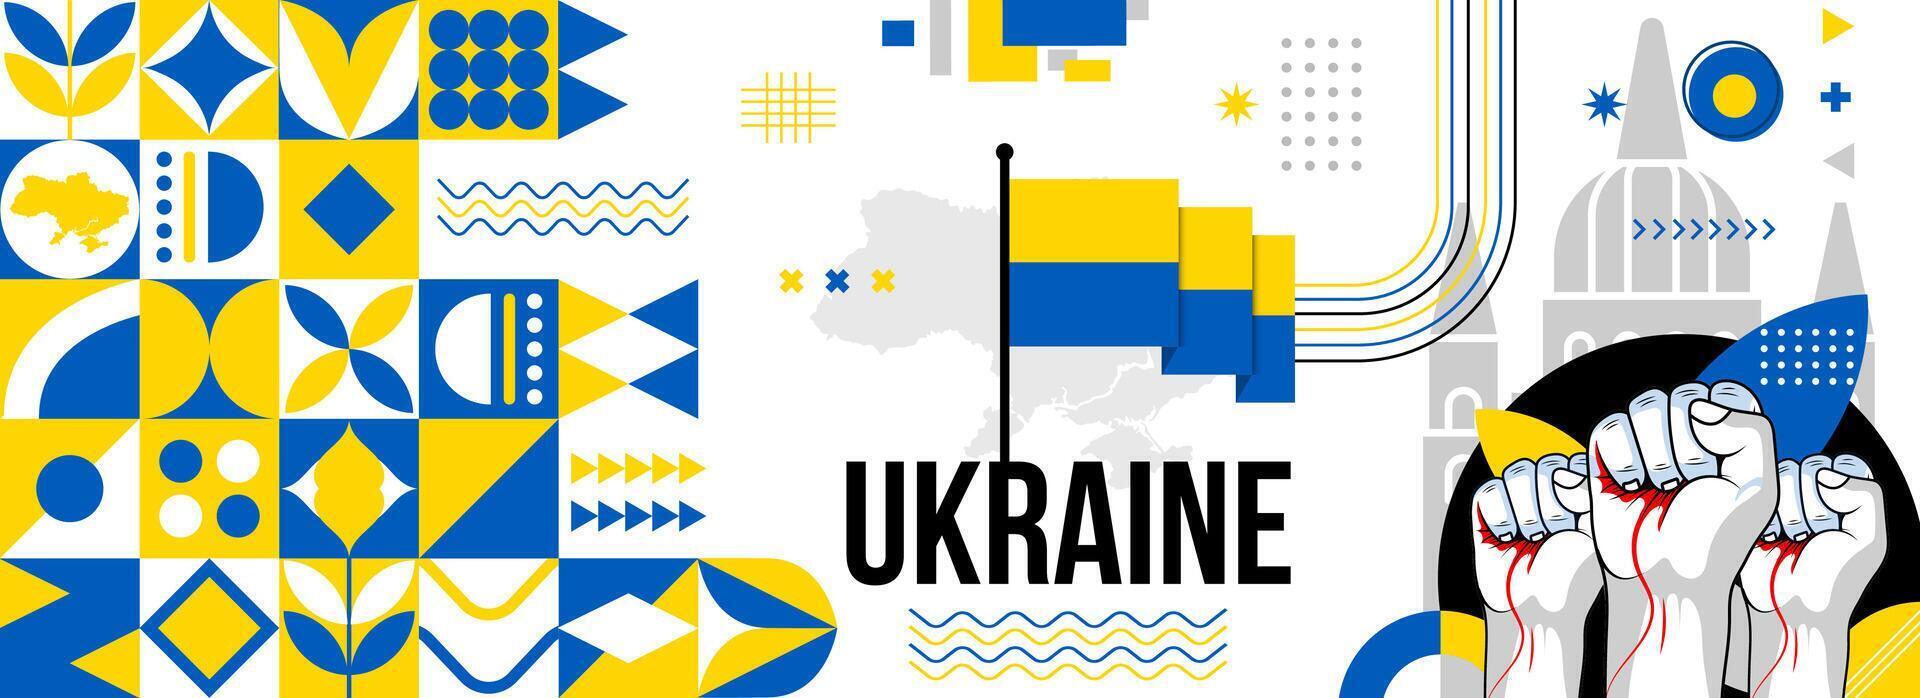 Ukraine national or independence day banner for country celebration. Flag and map of Ukraine with raised fists. Modern retro design with typorgaphy abstract geometric icons. Vector illustration